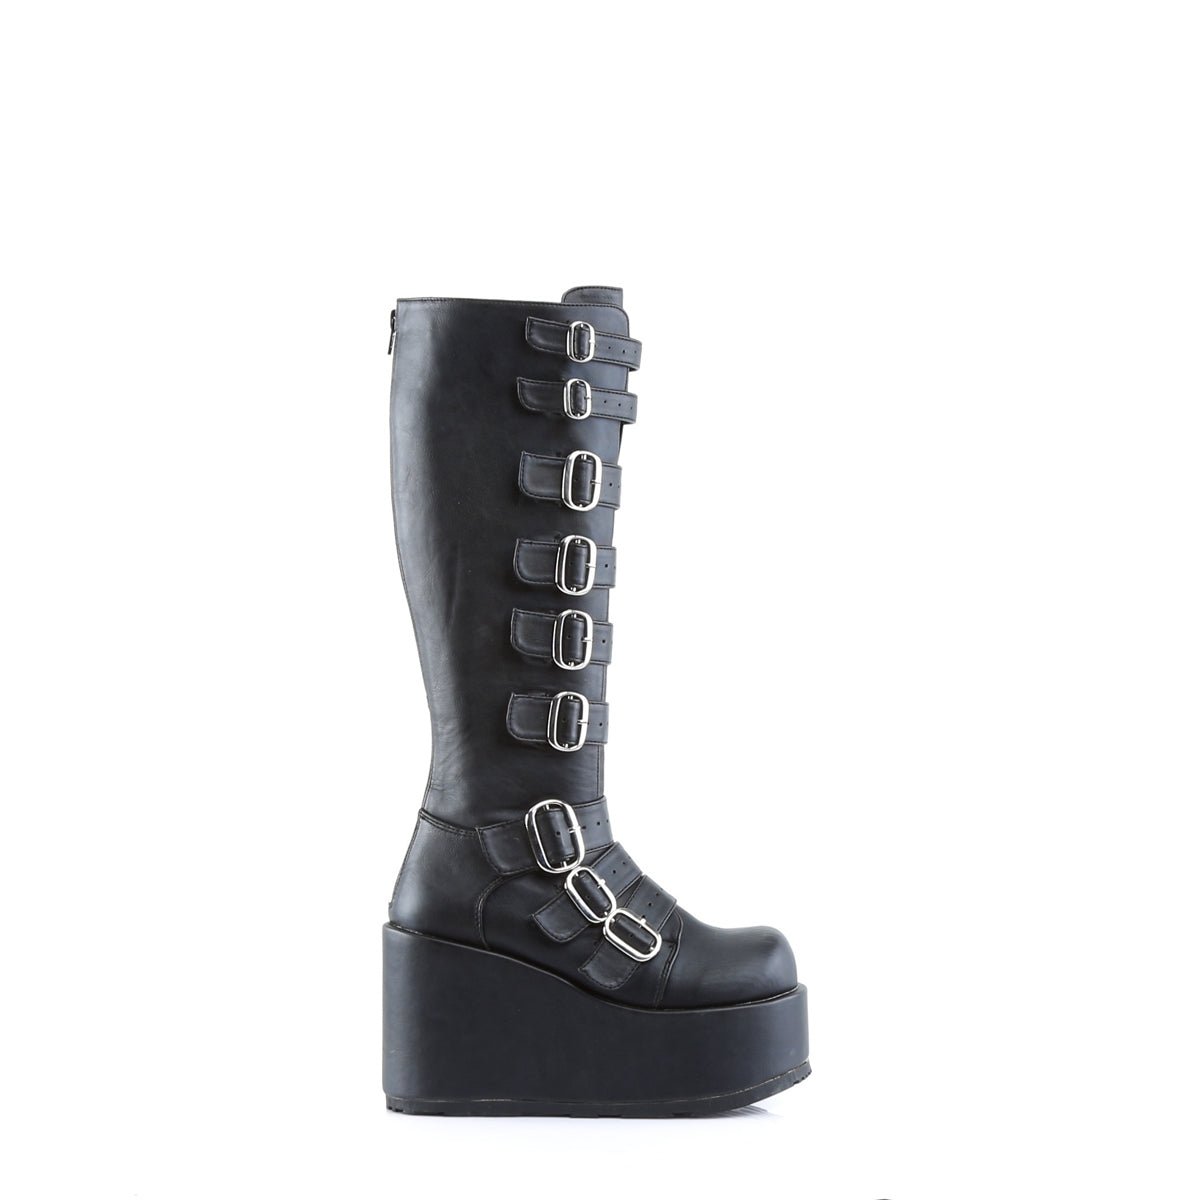 Too Fast | Demonia Concord 108 | Black Vegan Leather Women's Knee High Boots